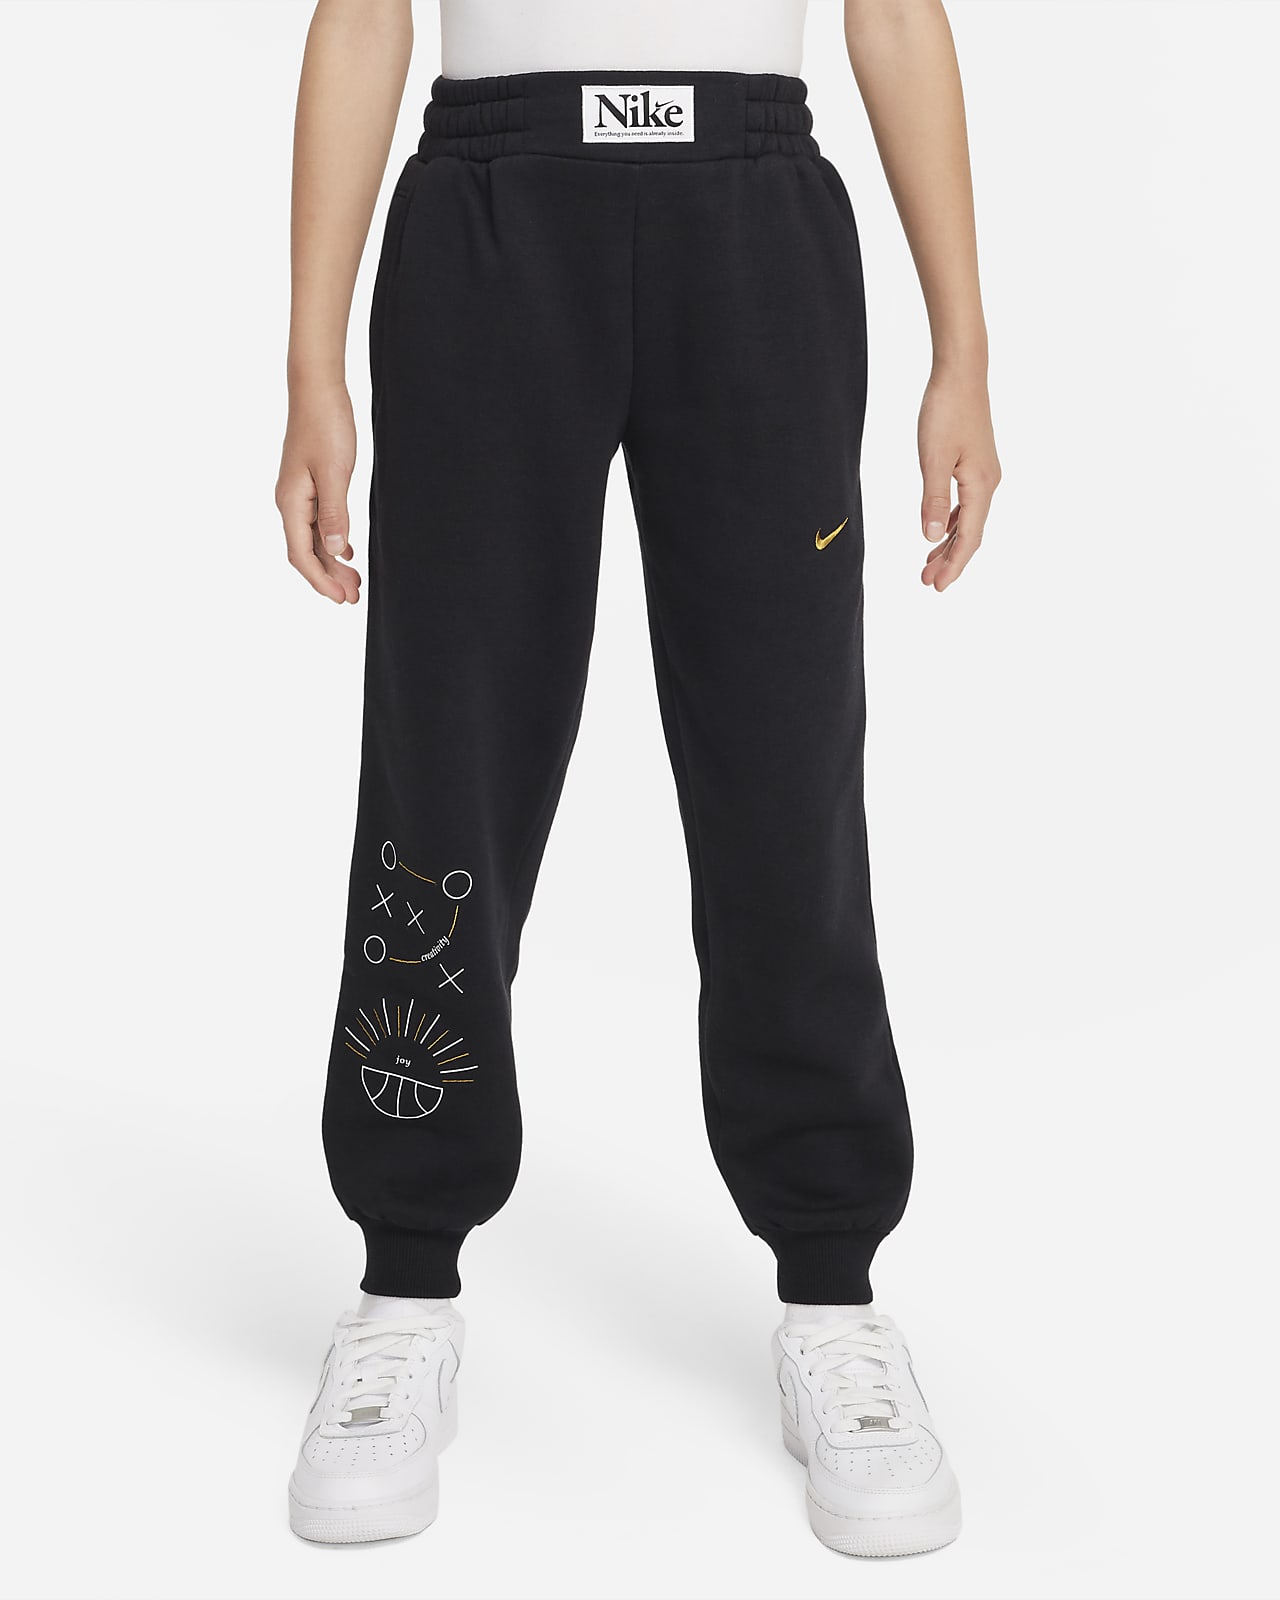 Nike Culture of Basketball Older Kids' Basketball Loose Trousers